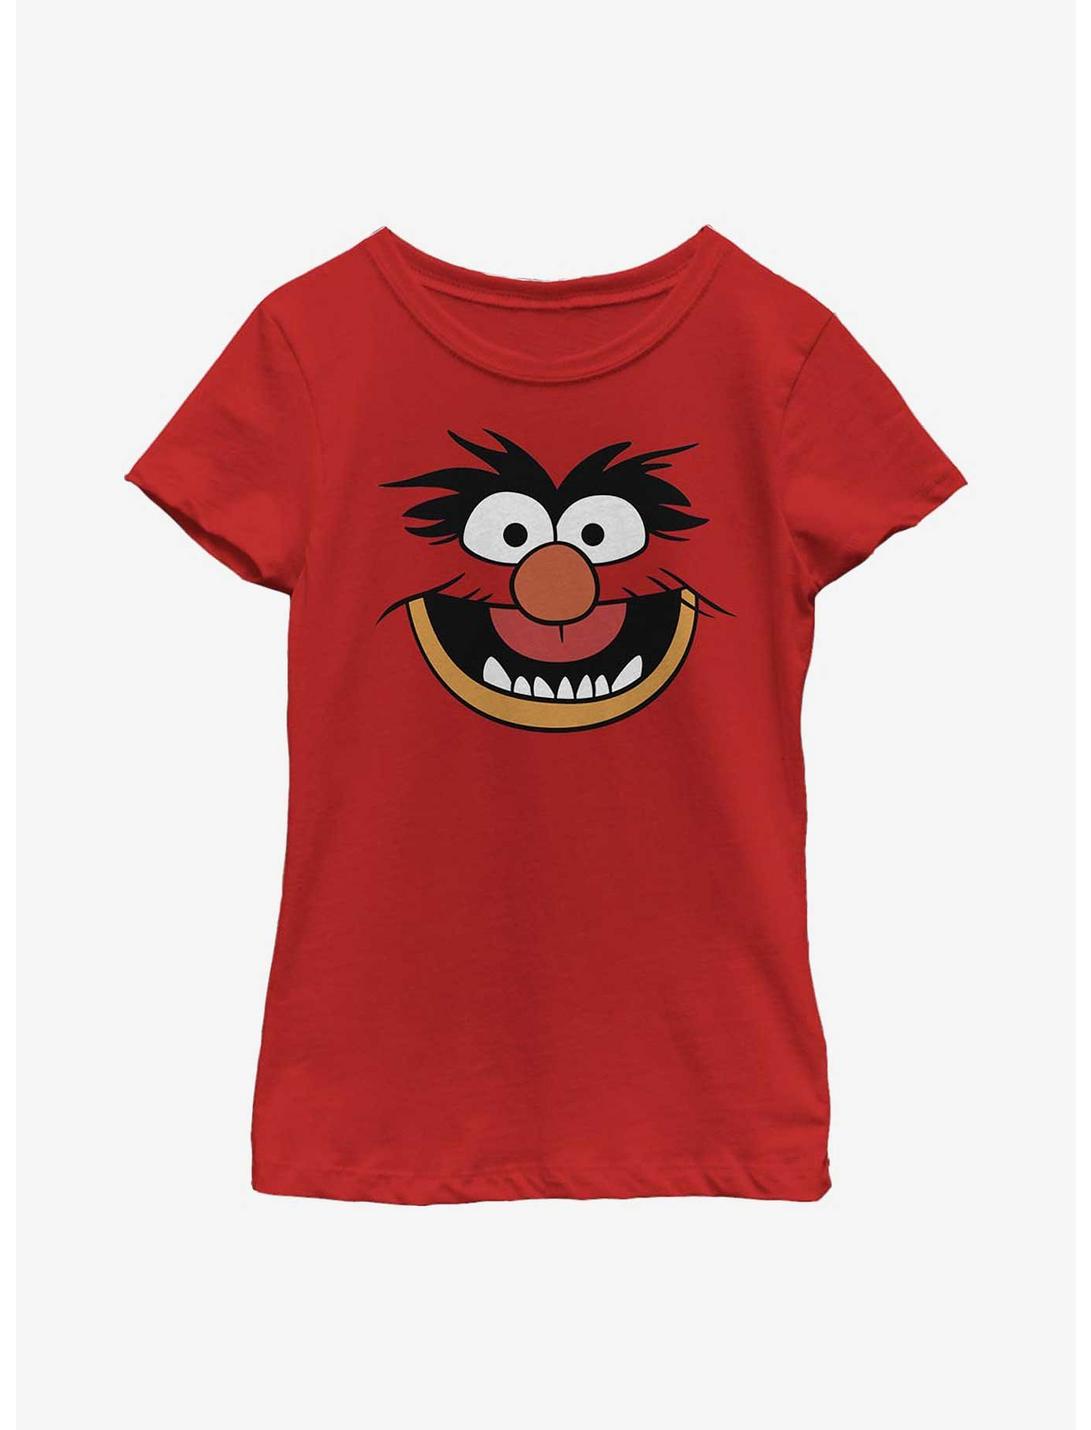 Disney The Muppets Animal Costume Youth Girls T-Shirt, RED, hi-res